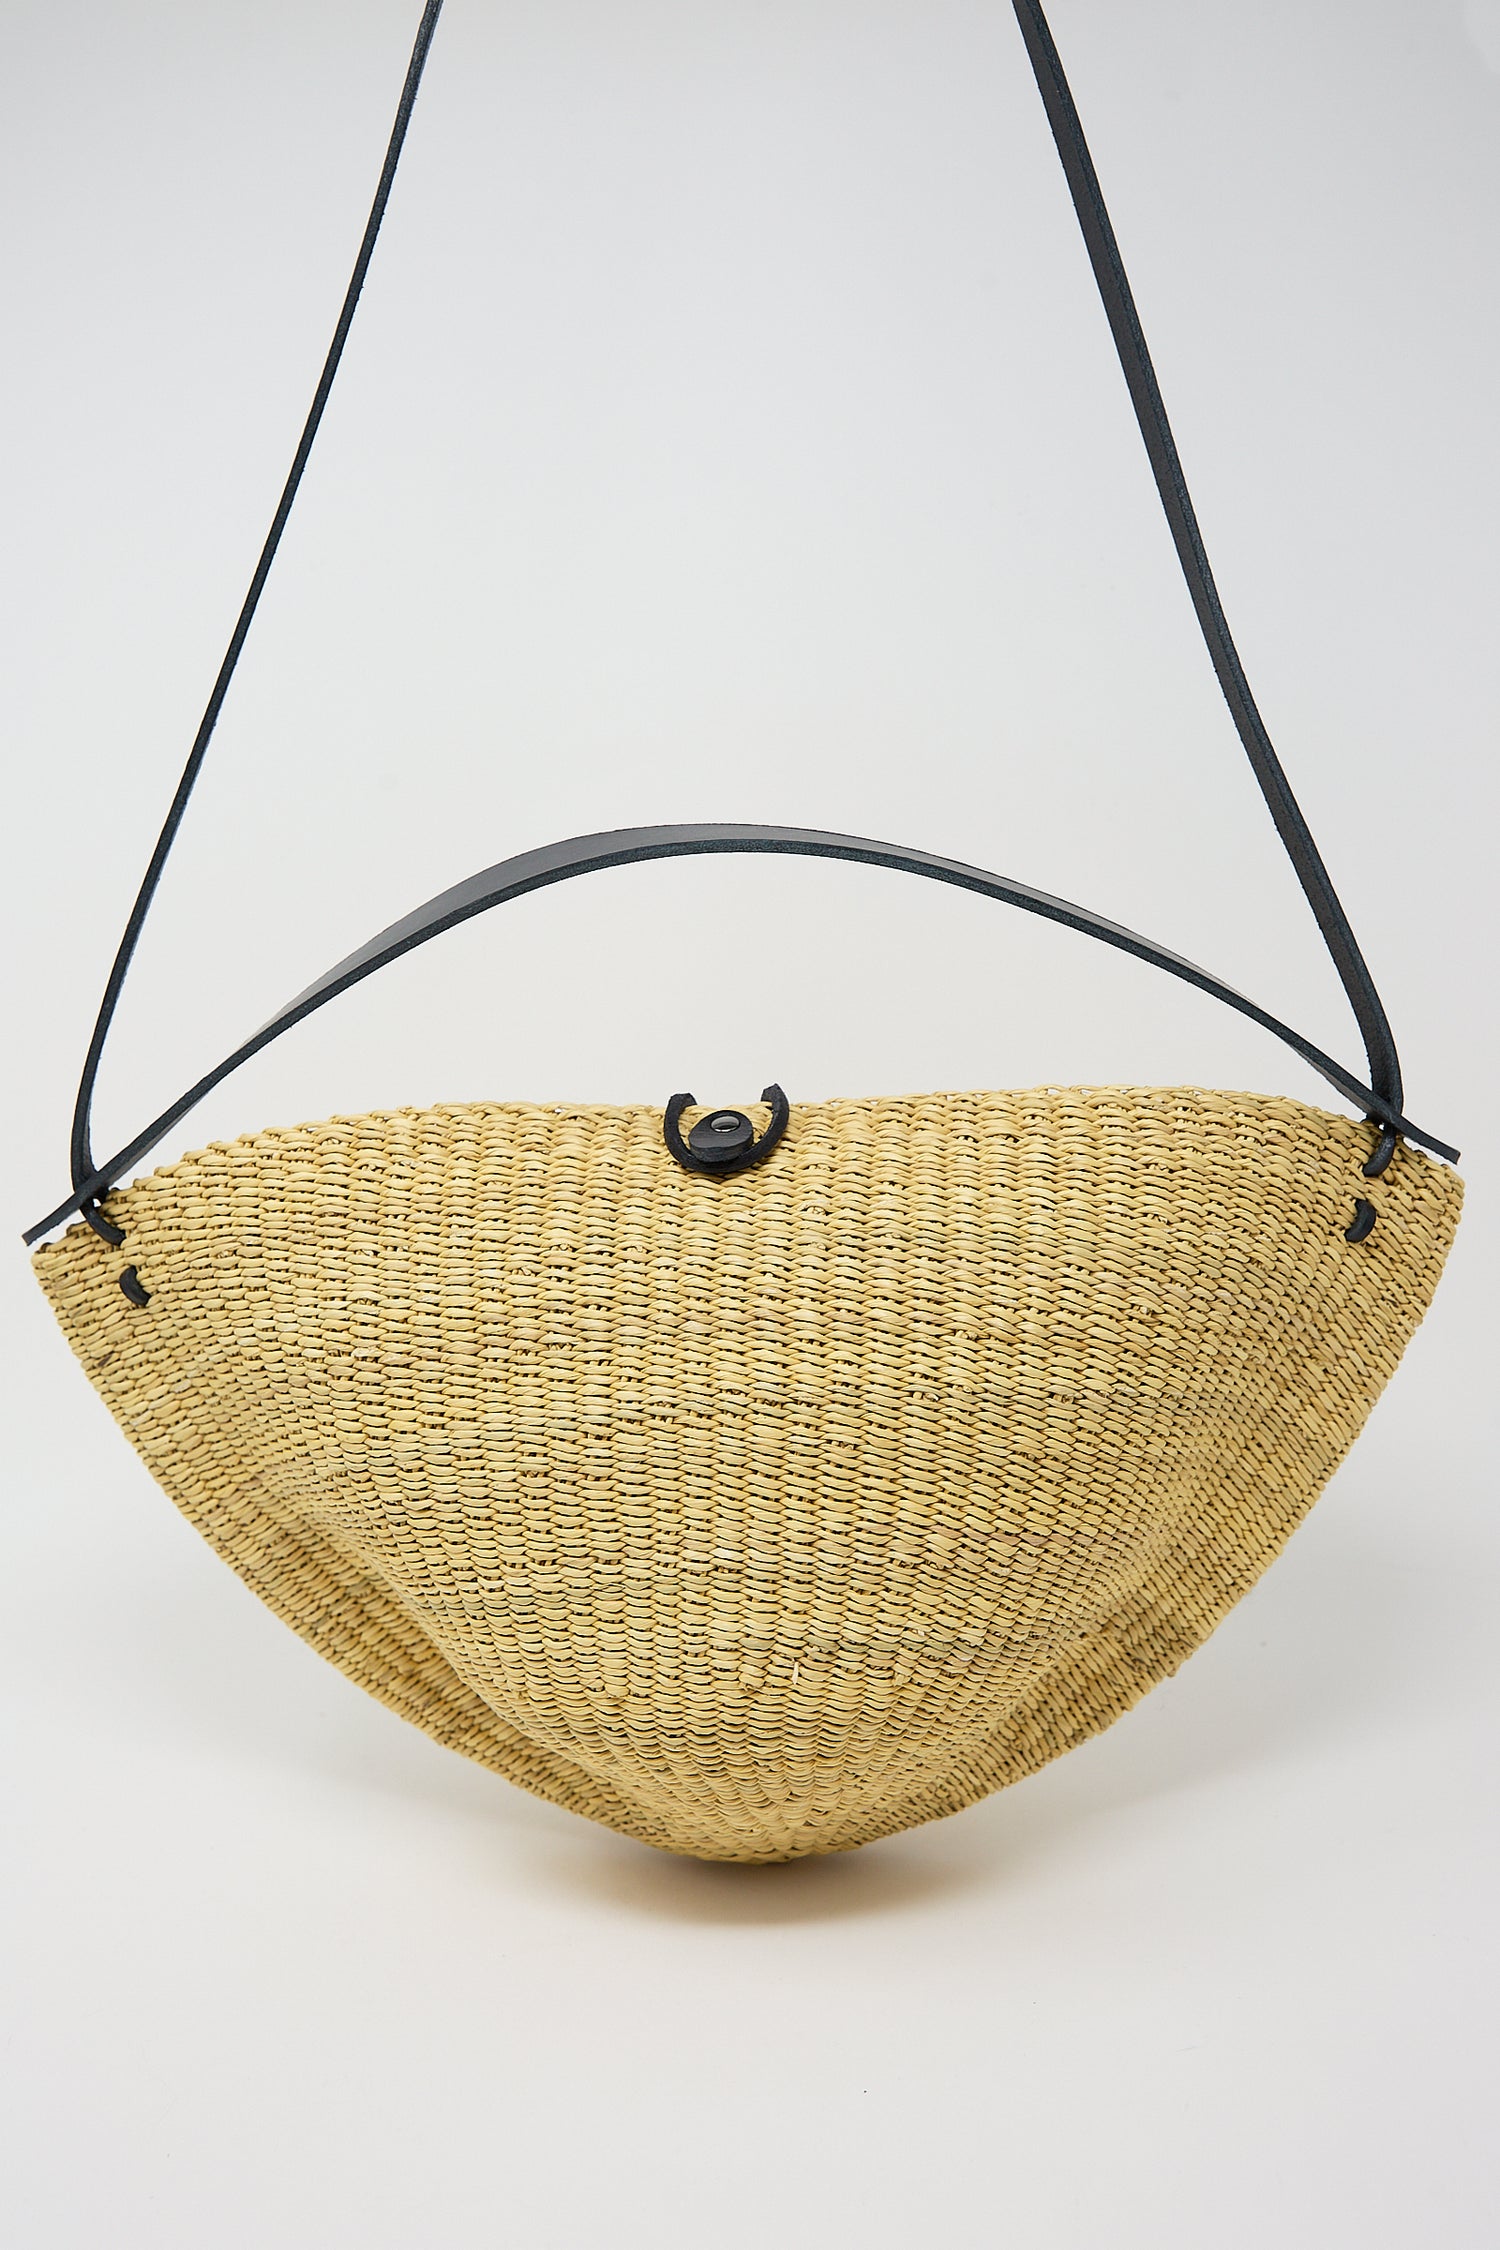 Woven yellow half-moon shaped N. 33 Medium Walnut Bag in Natural made from elephant grass with a black strap by Inès Bressand.